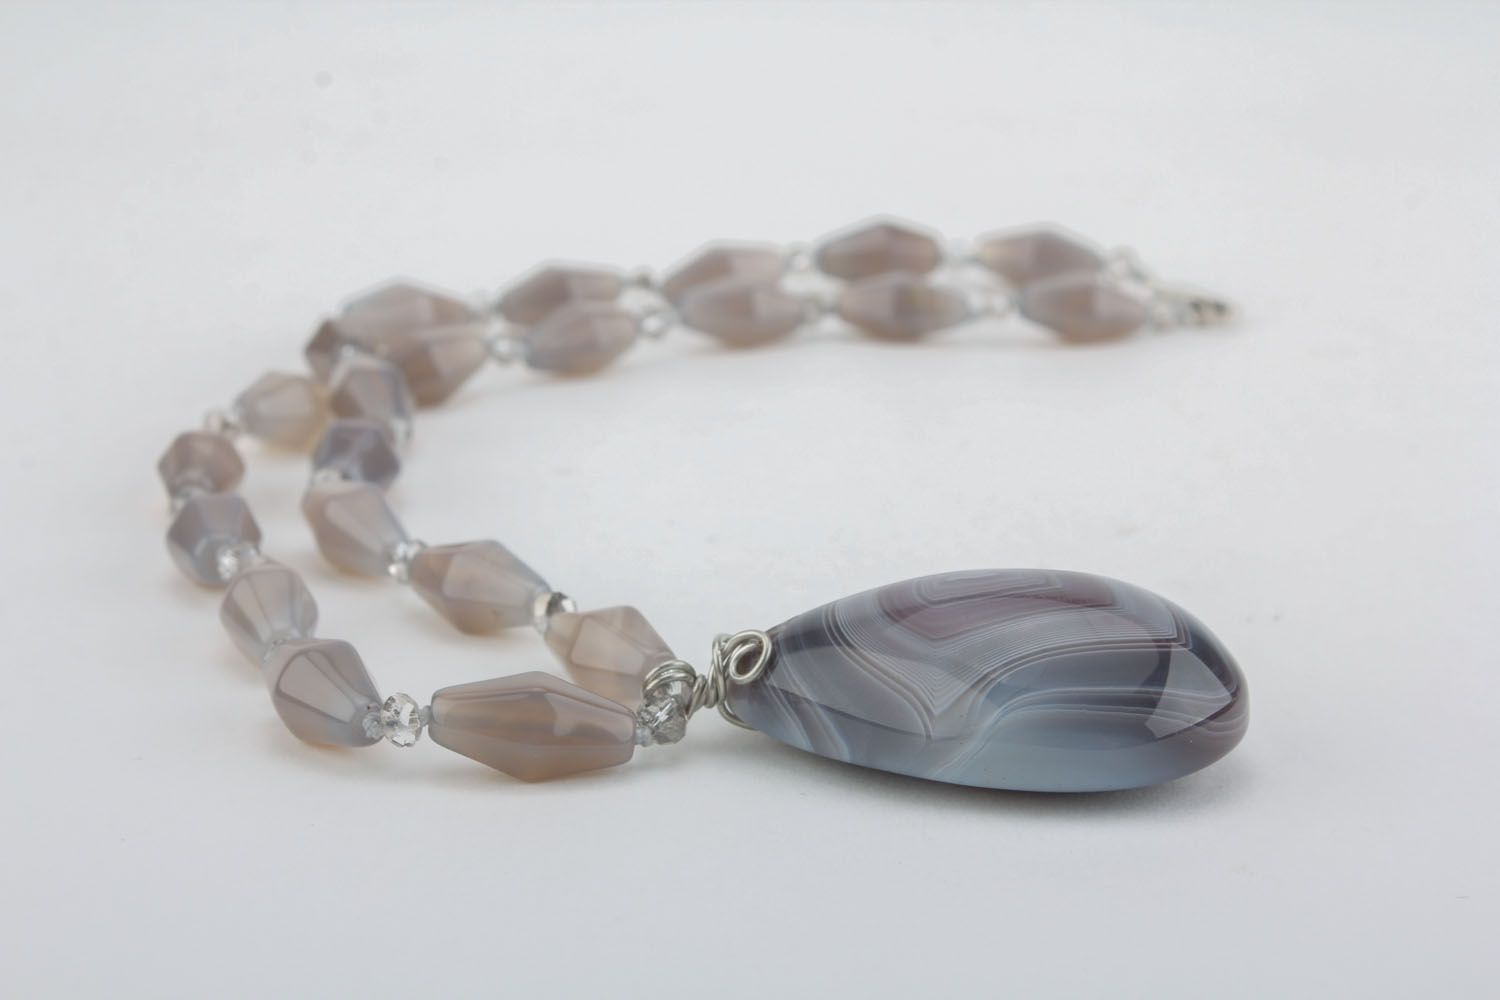 Agate necklace photo 2